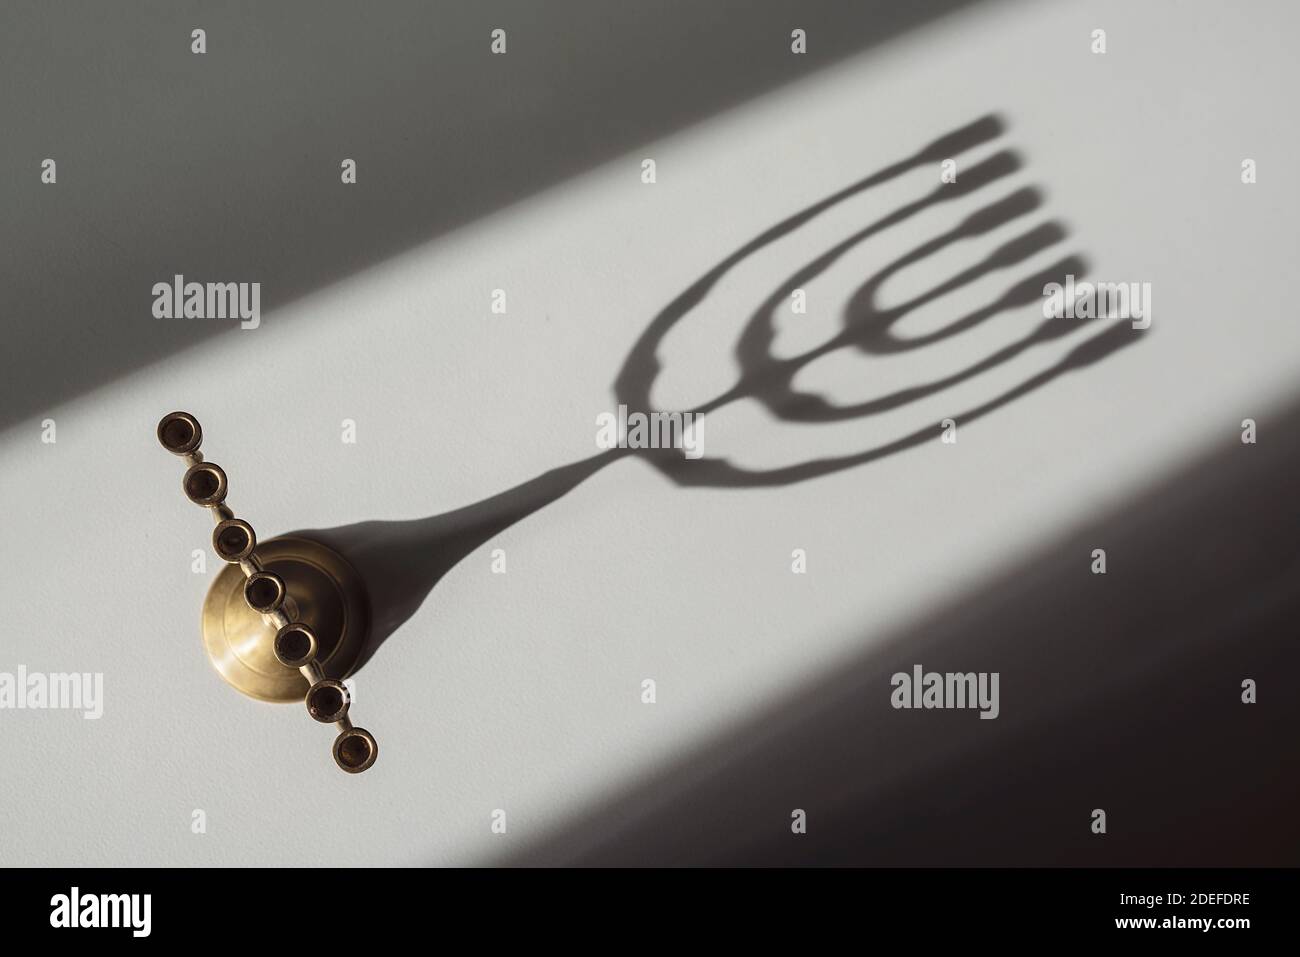 View from above of a Jewish candlestick and its shadow Stock Photo